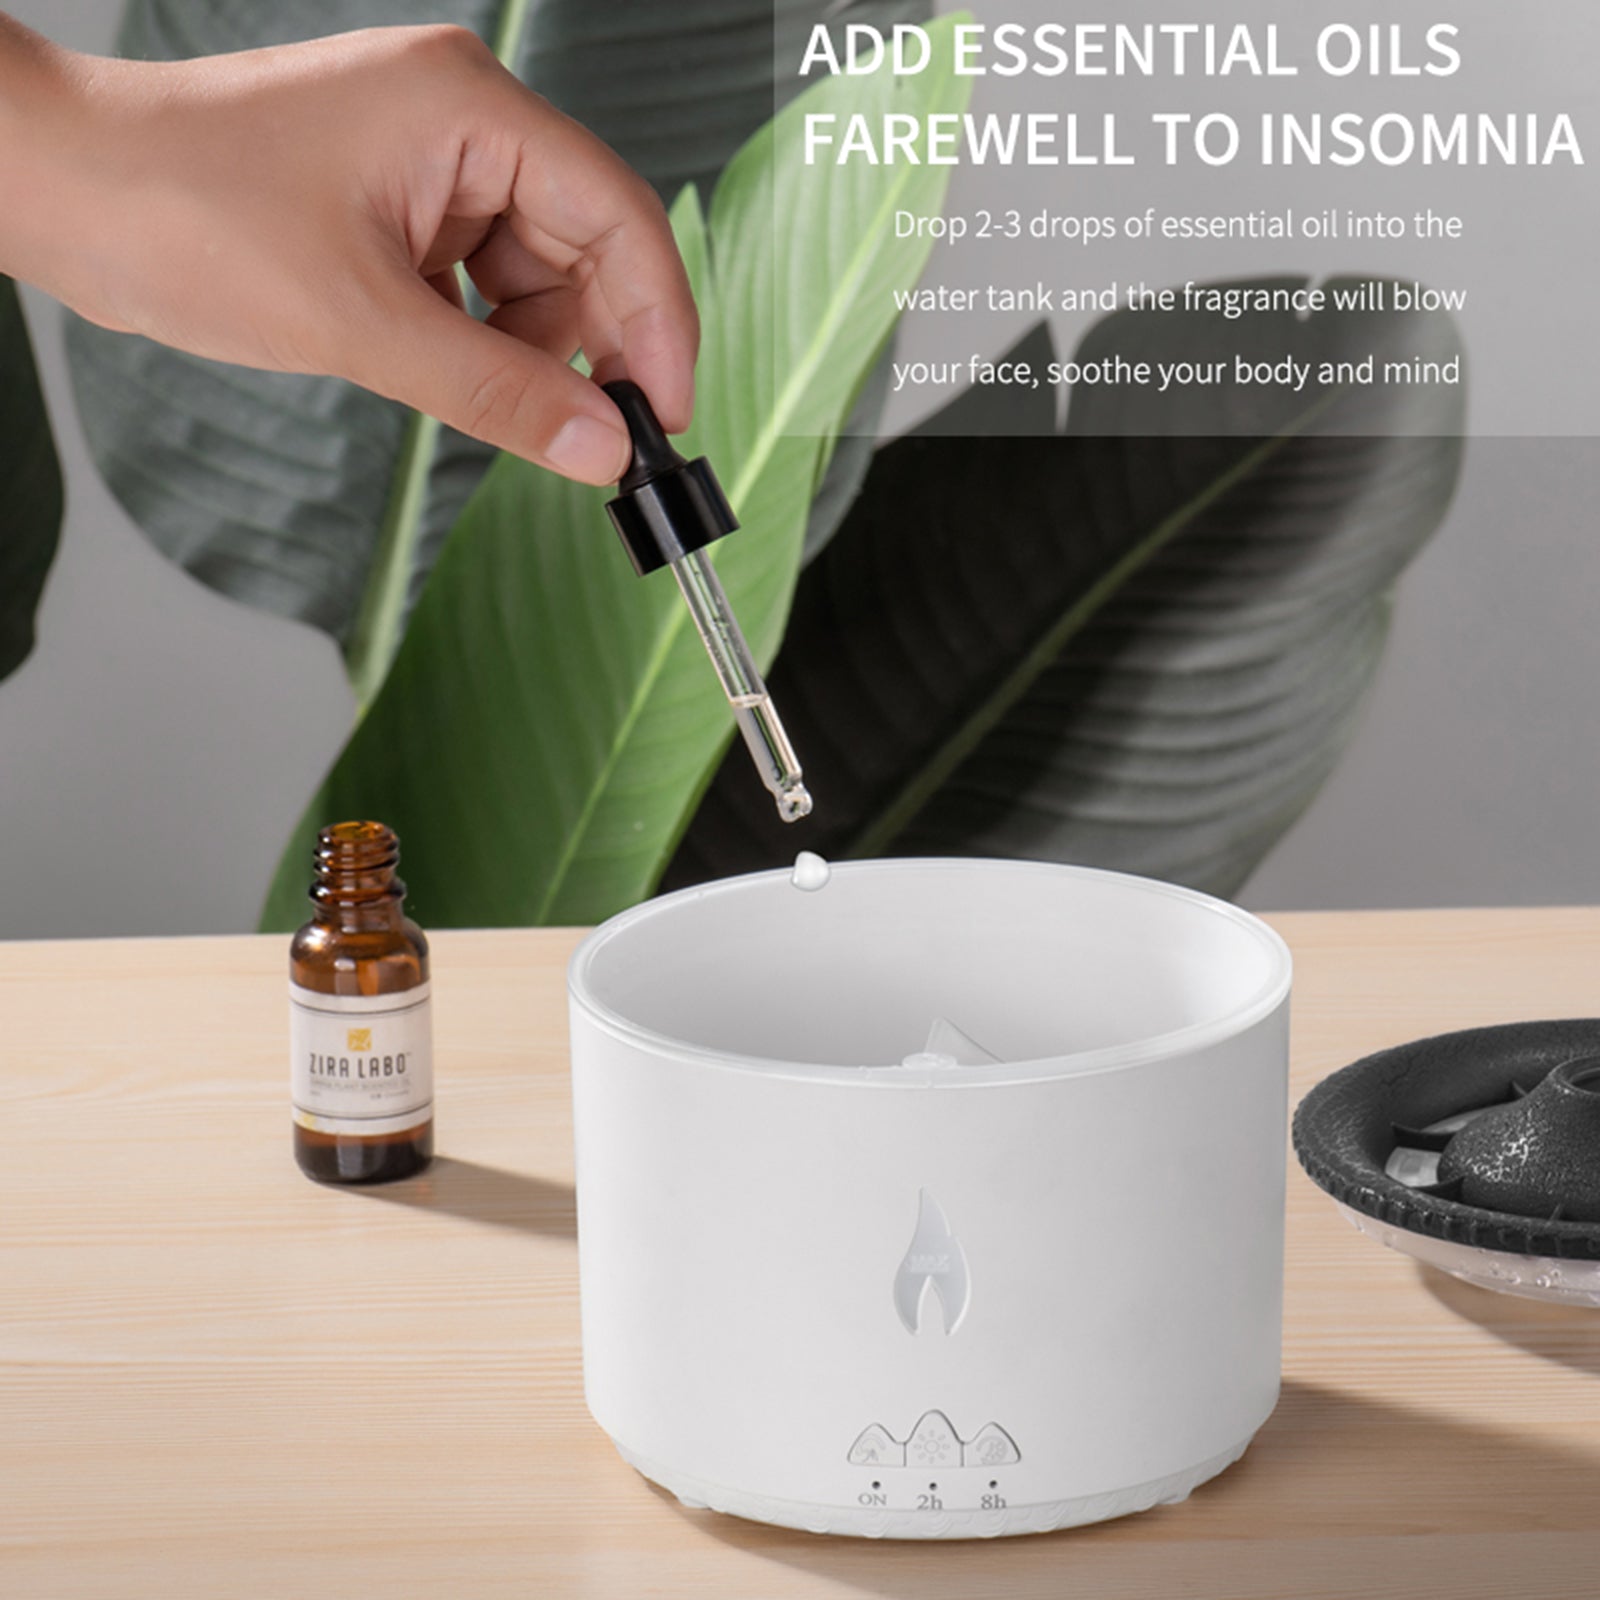 Flame Light LED Humidifier Aroma Fragrance Oil Diffuser– Volcanic Mist Creative Gifts for Home, Office